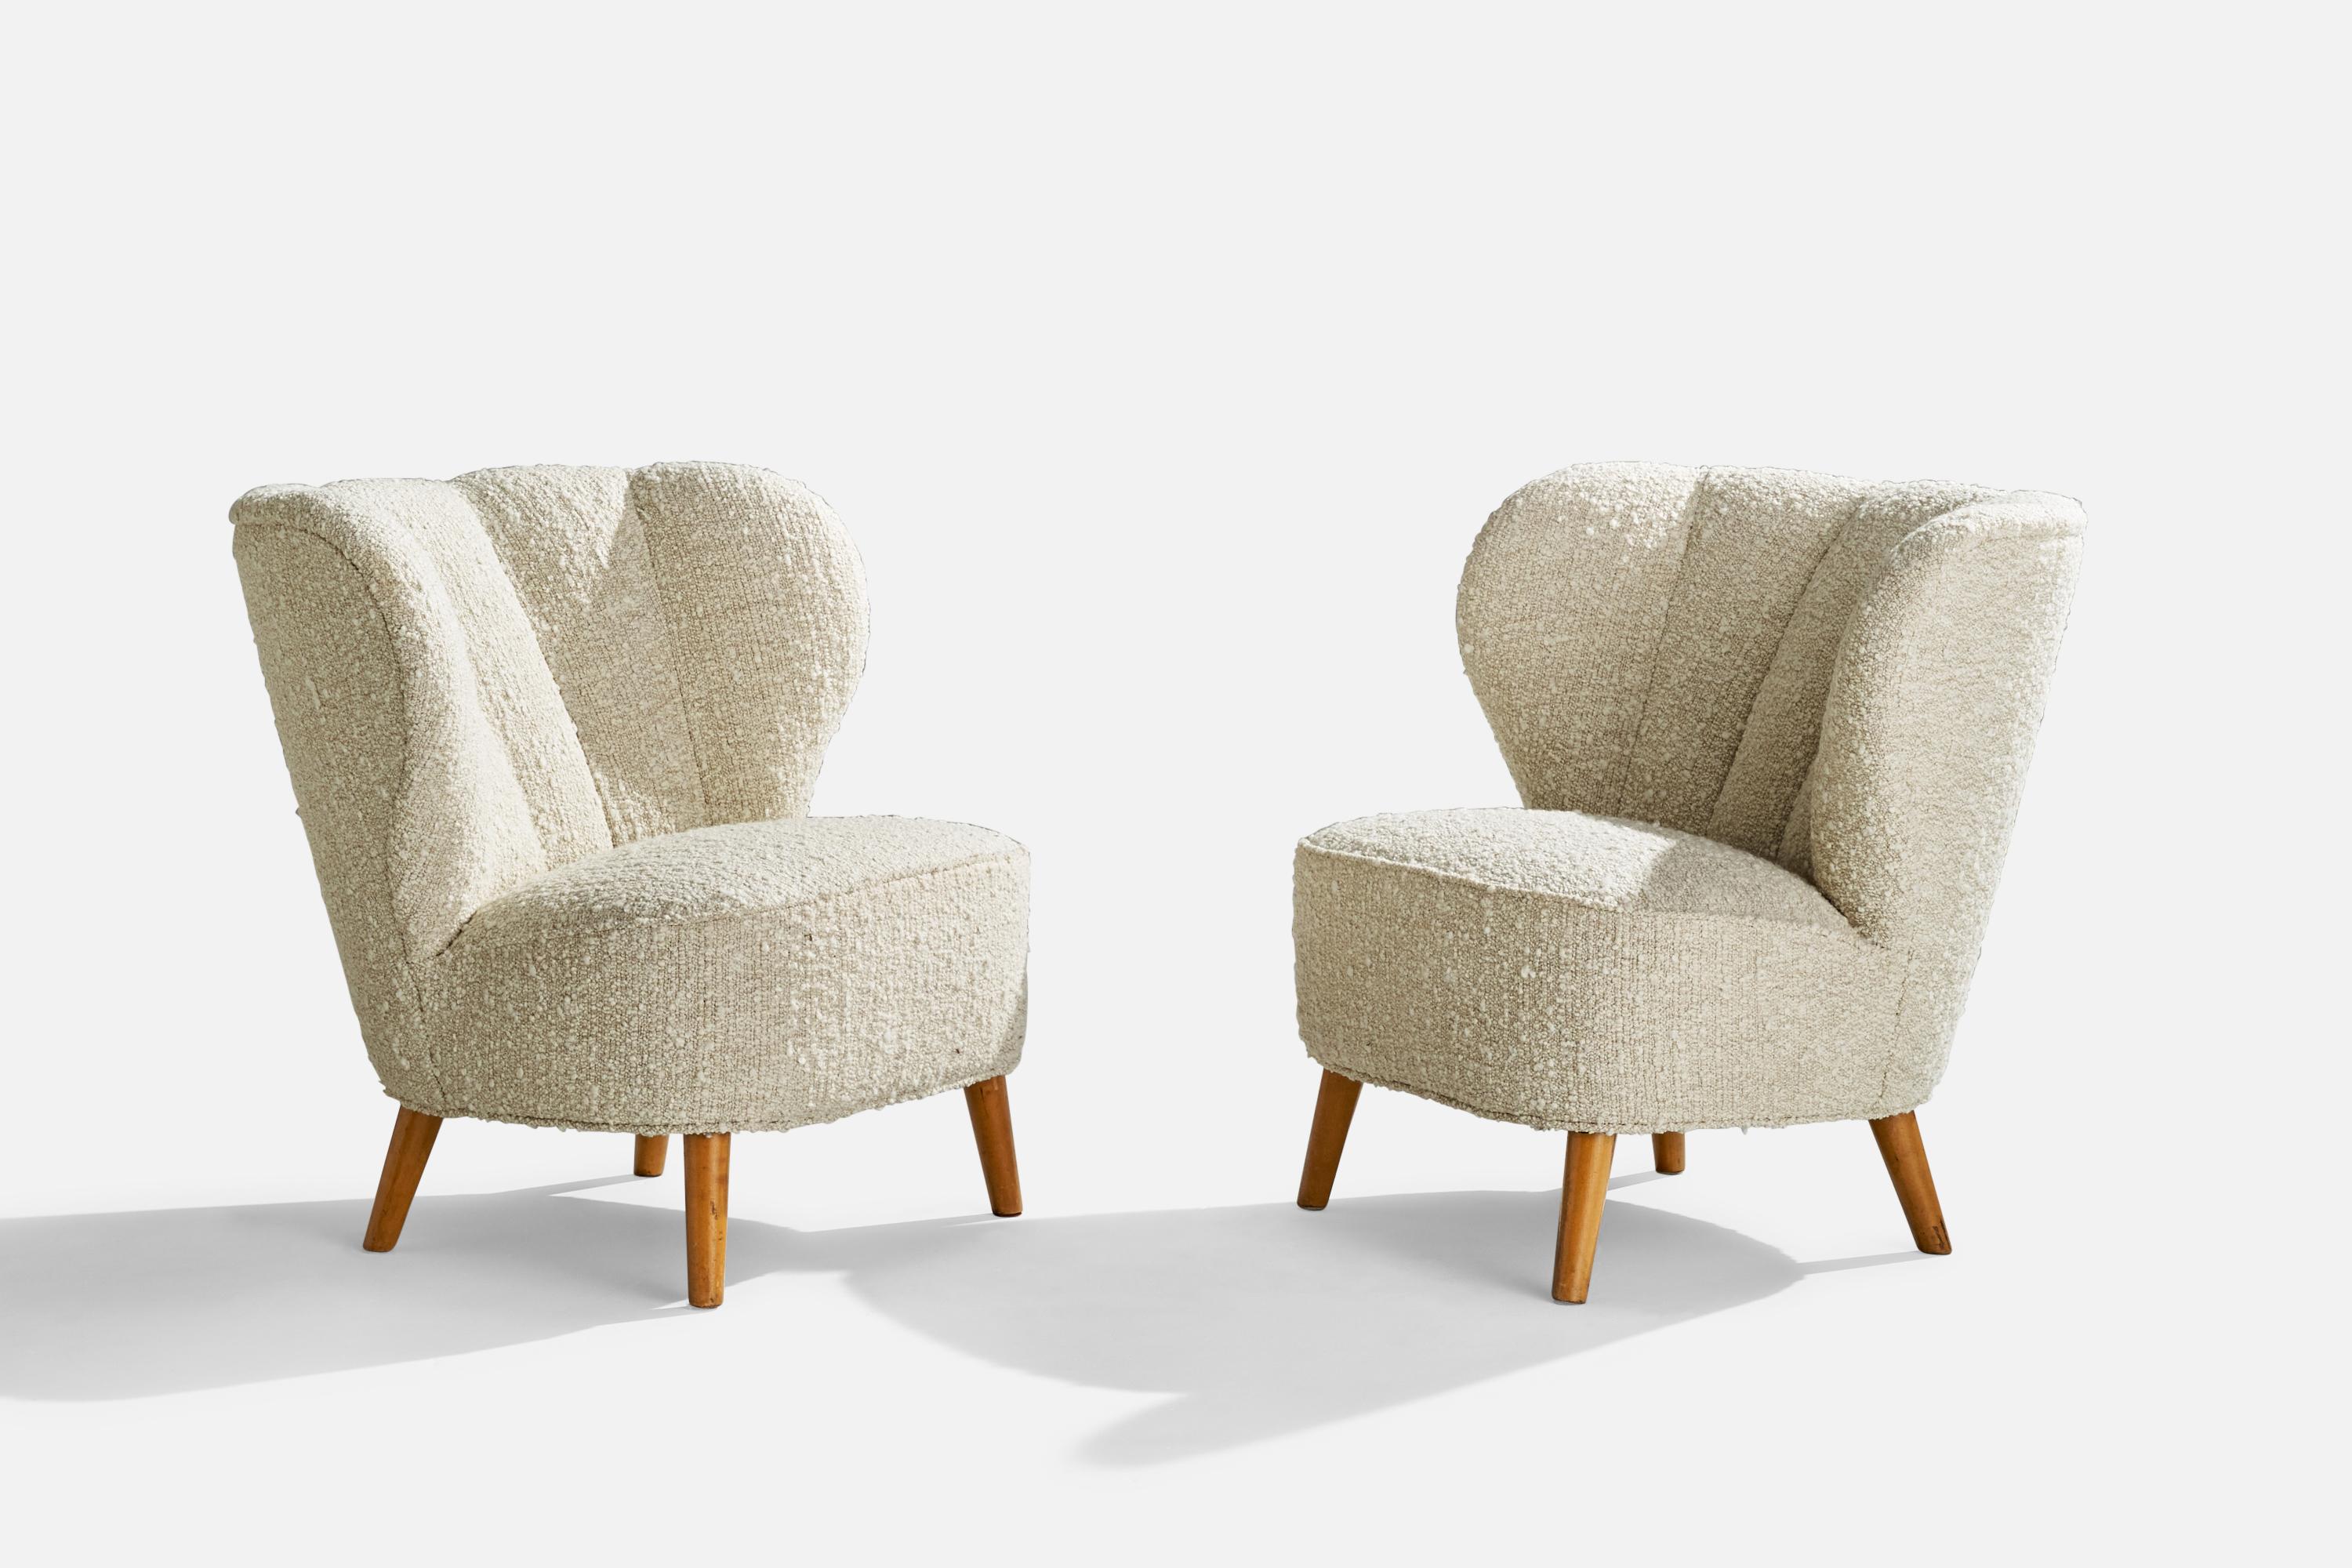 A pair of white bouclé fabric and birch slipper lounge chairs designed and produced in Finland, 1940s.

Seat height 16”.